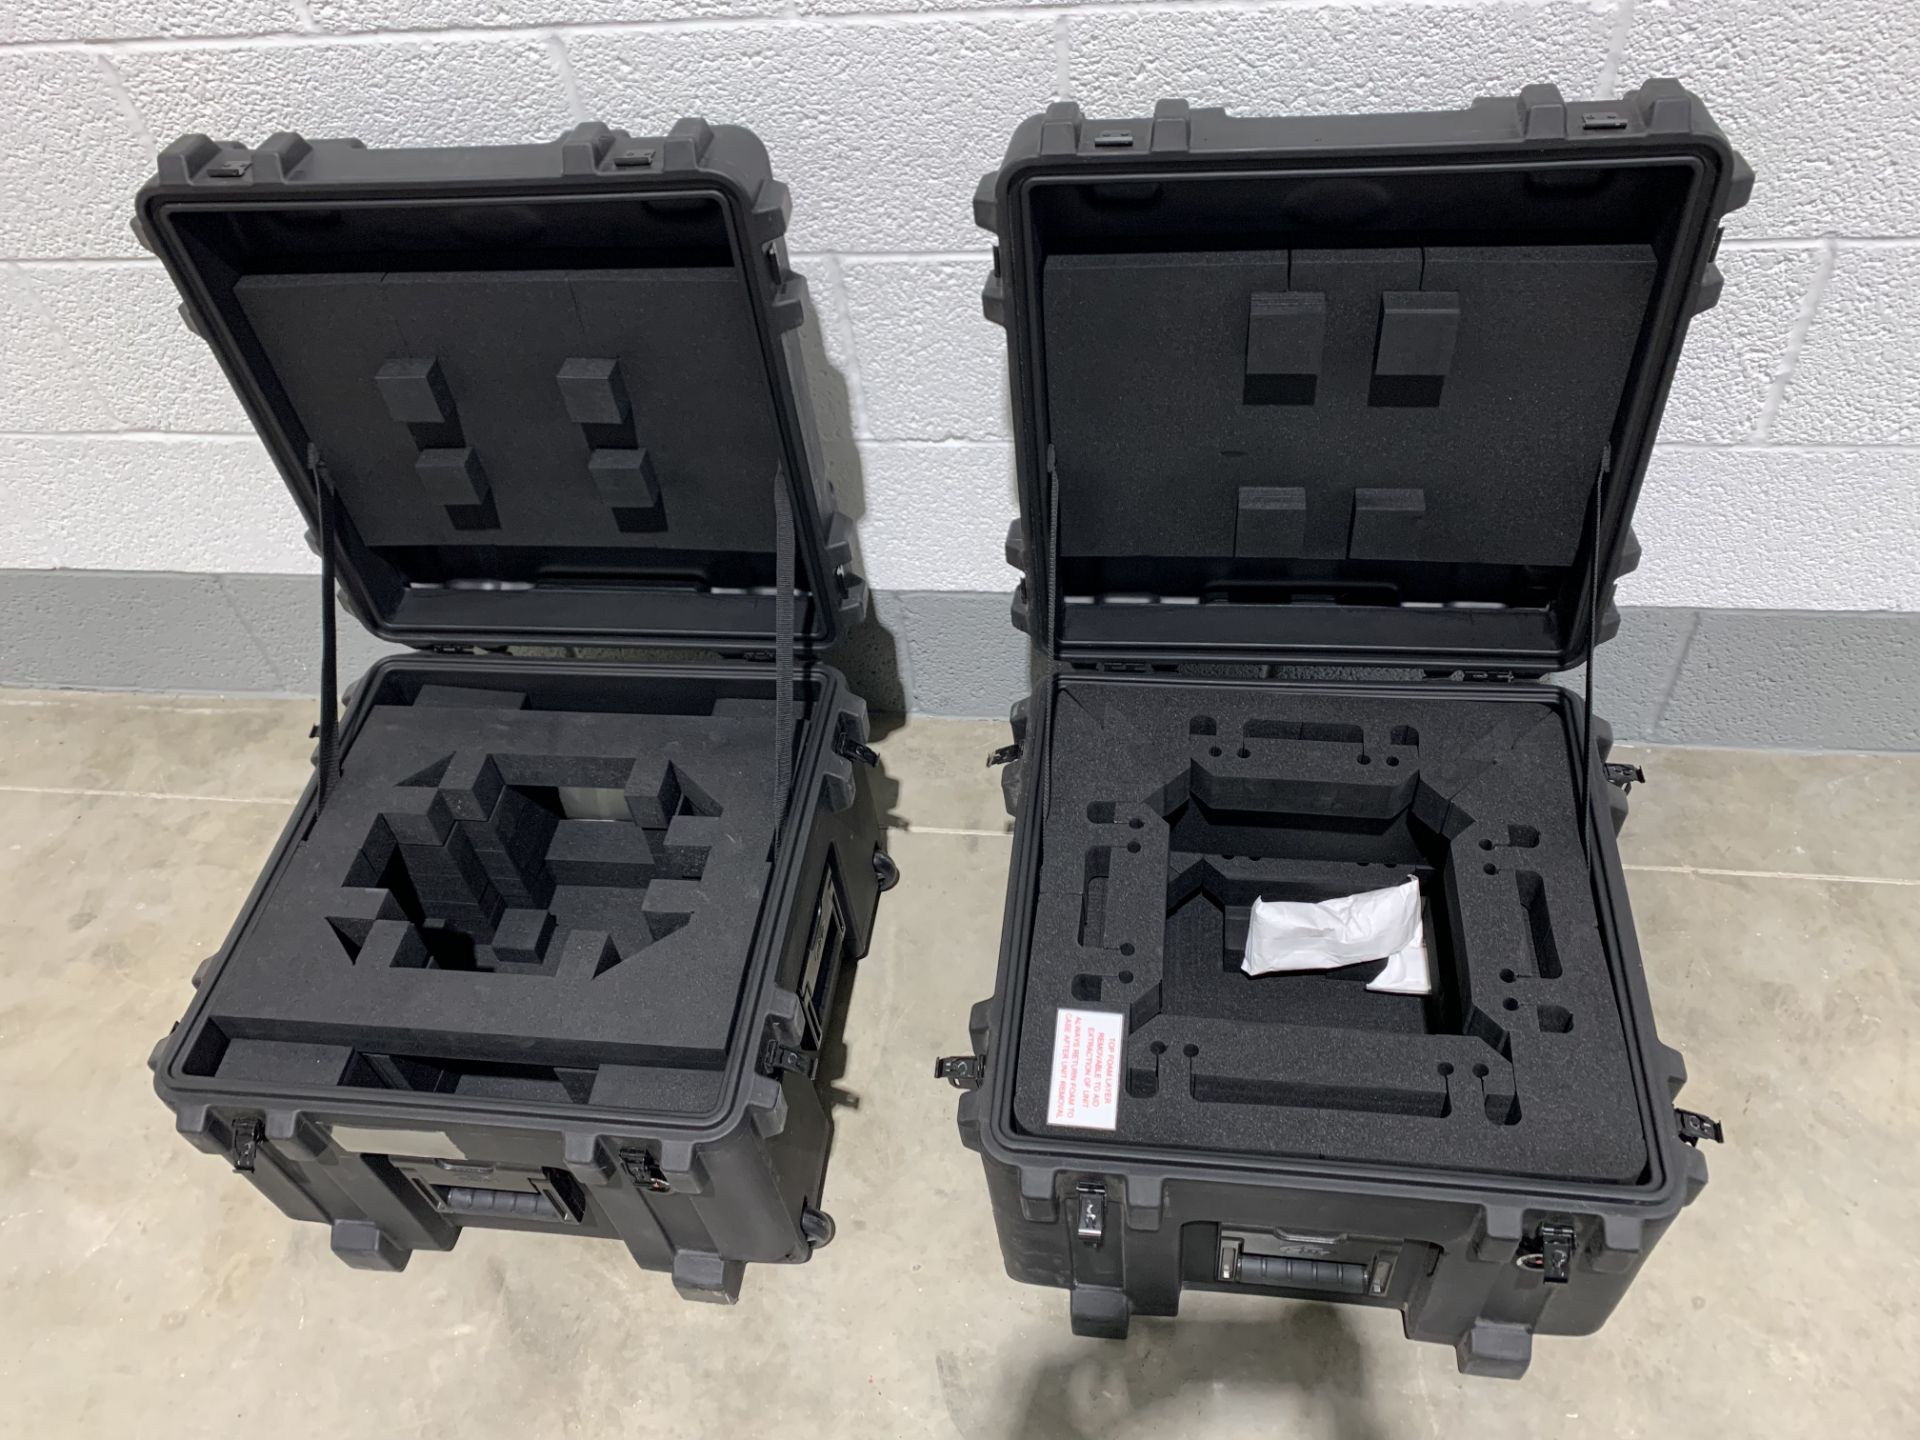 2x SKB R Series 1919-14 Waterproof Utility Case Roto Moulded Condition: Ex-Hire Solid cases. With - Image 2 of 4